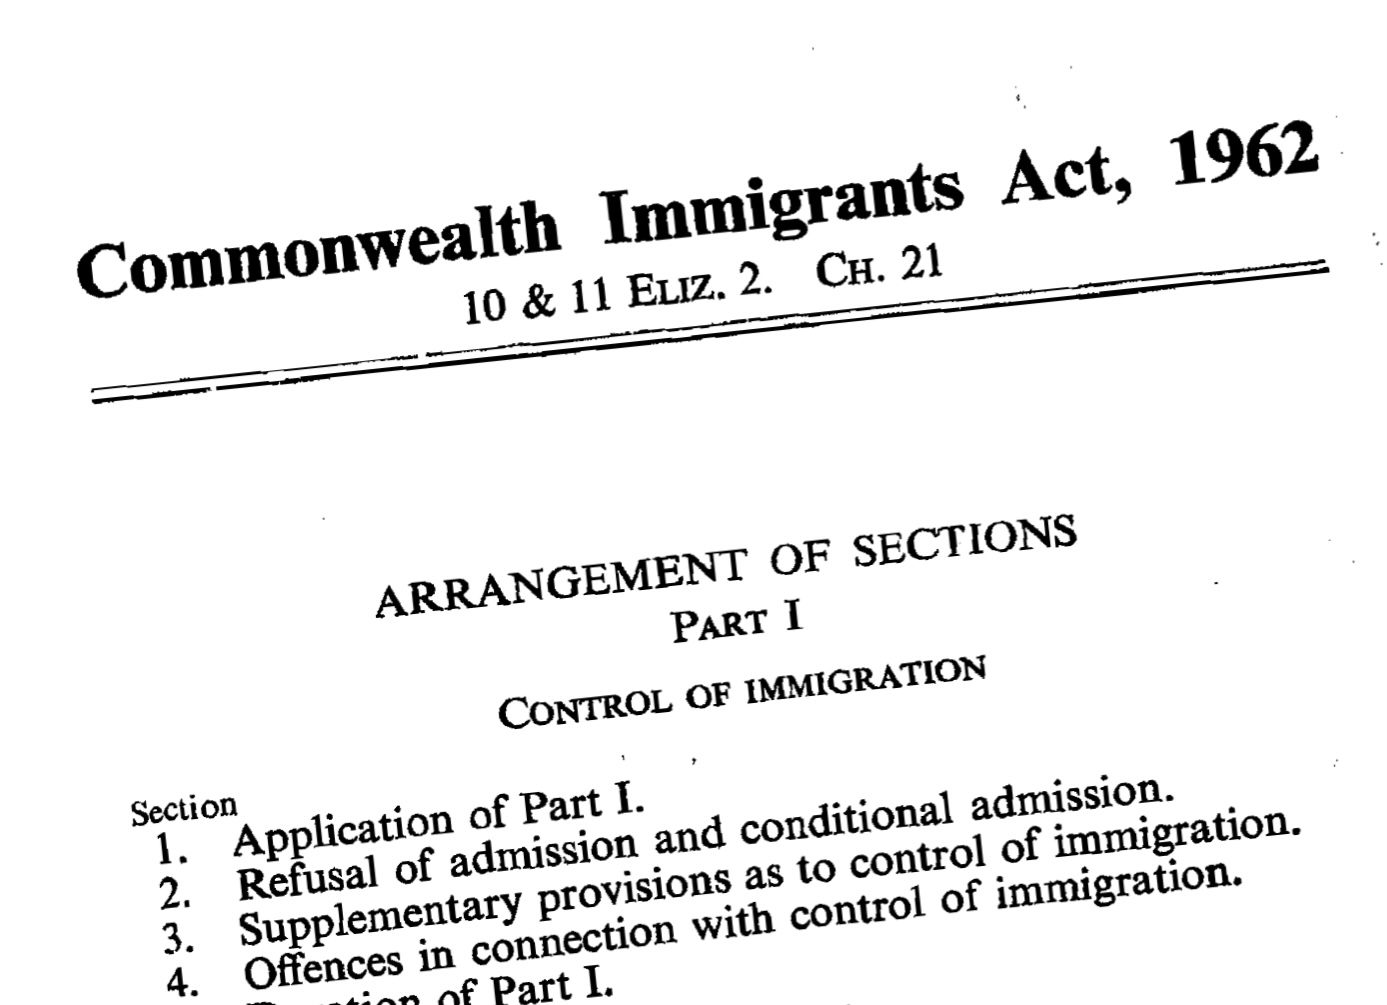 On this day 60 years ago, the first Commonwealth Immigrants Act came into effect